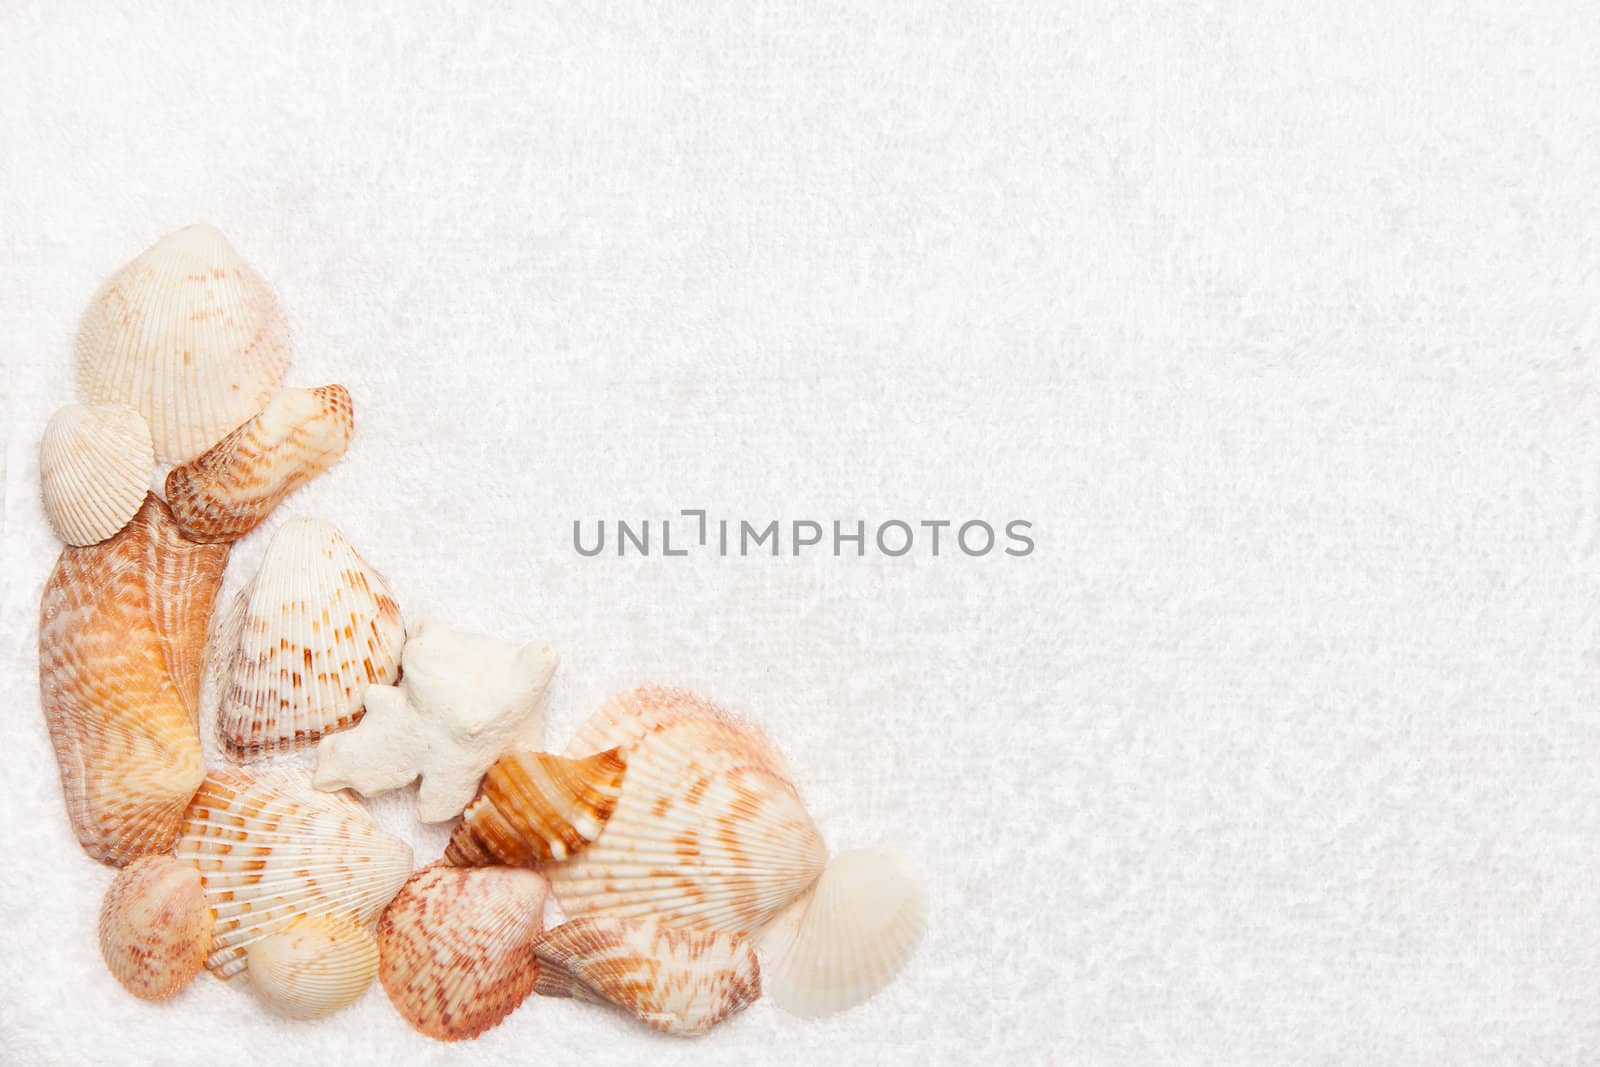 Sea Shell Border on White Fluffy Towel Texture Background by scheriton